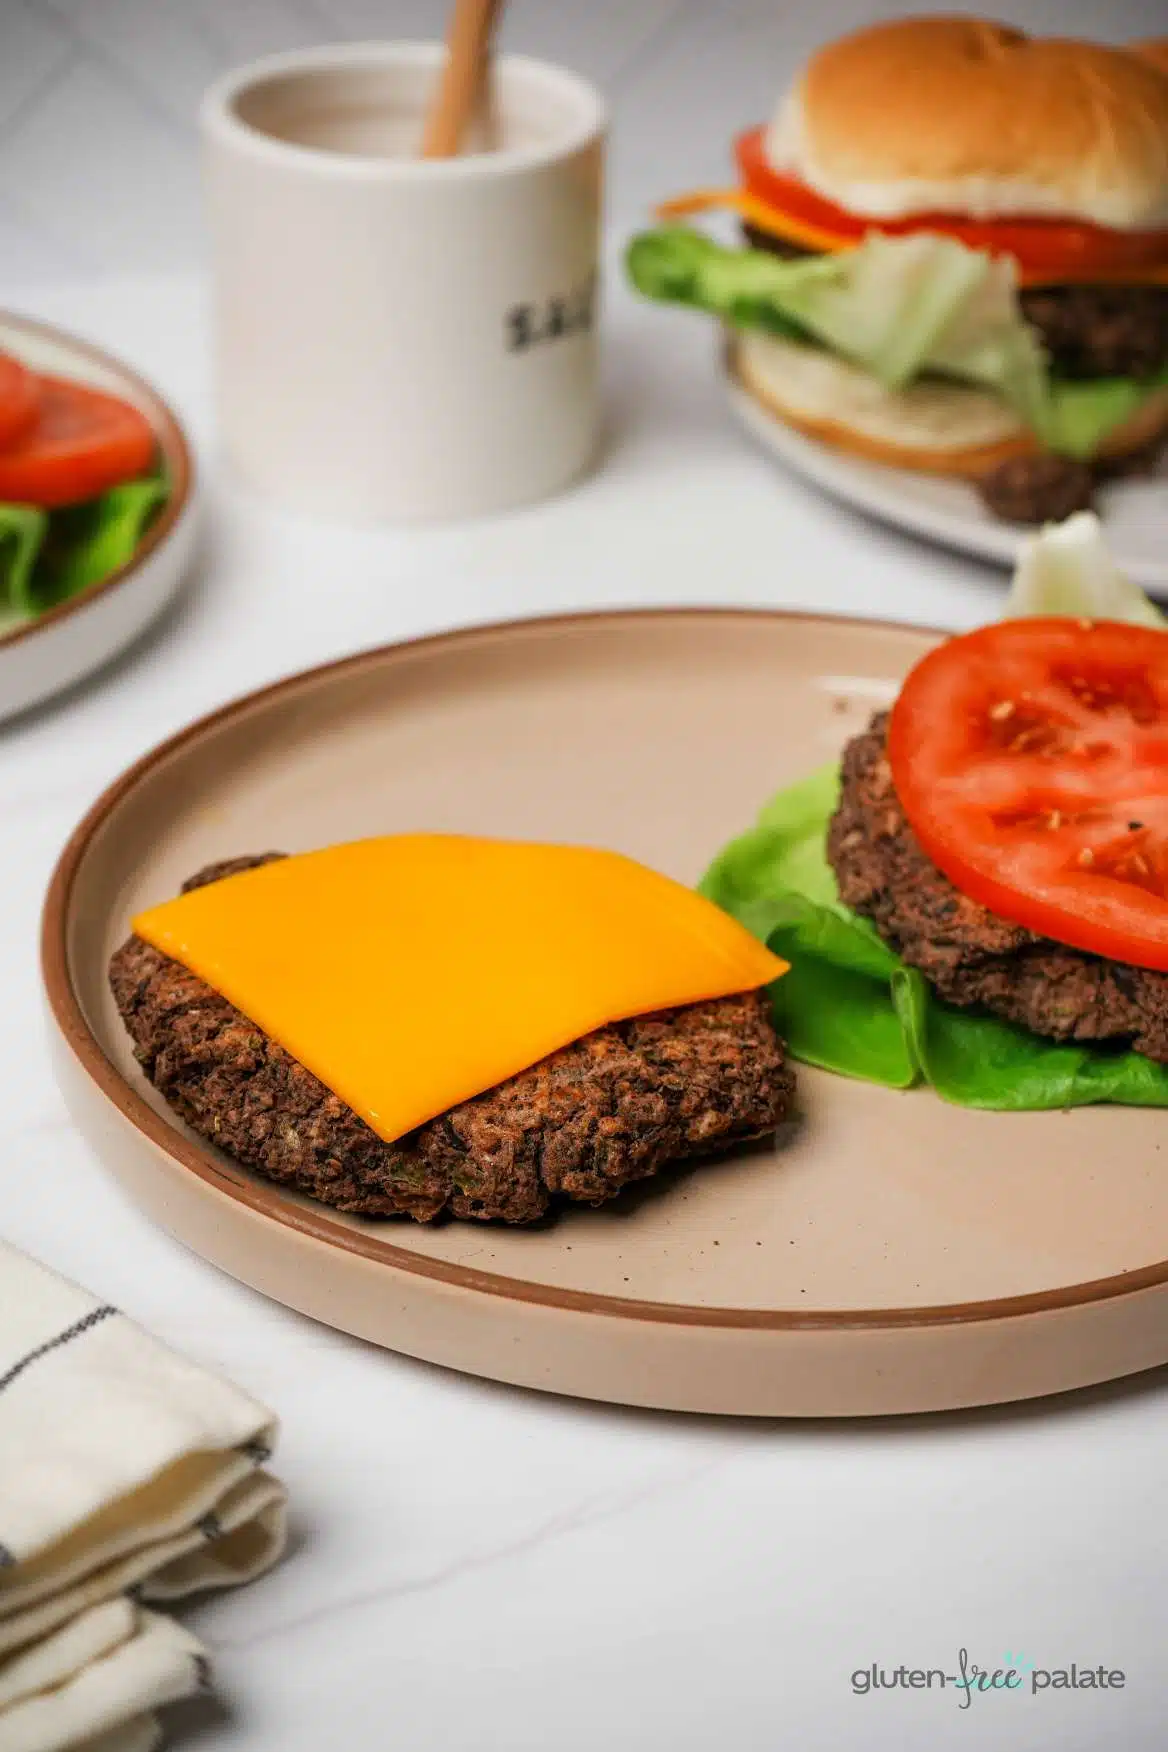 Gluten-free black bean burgers on a brown plate with cheese, lettuce, and tomato.